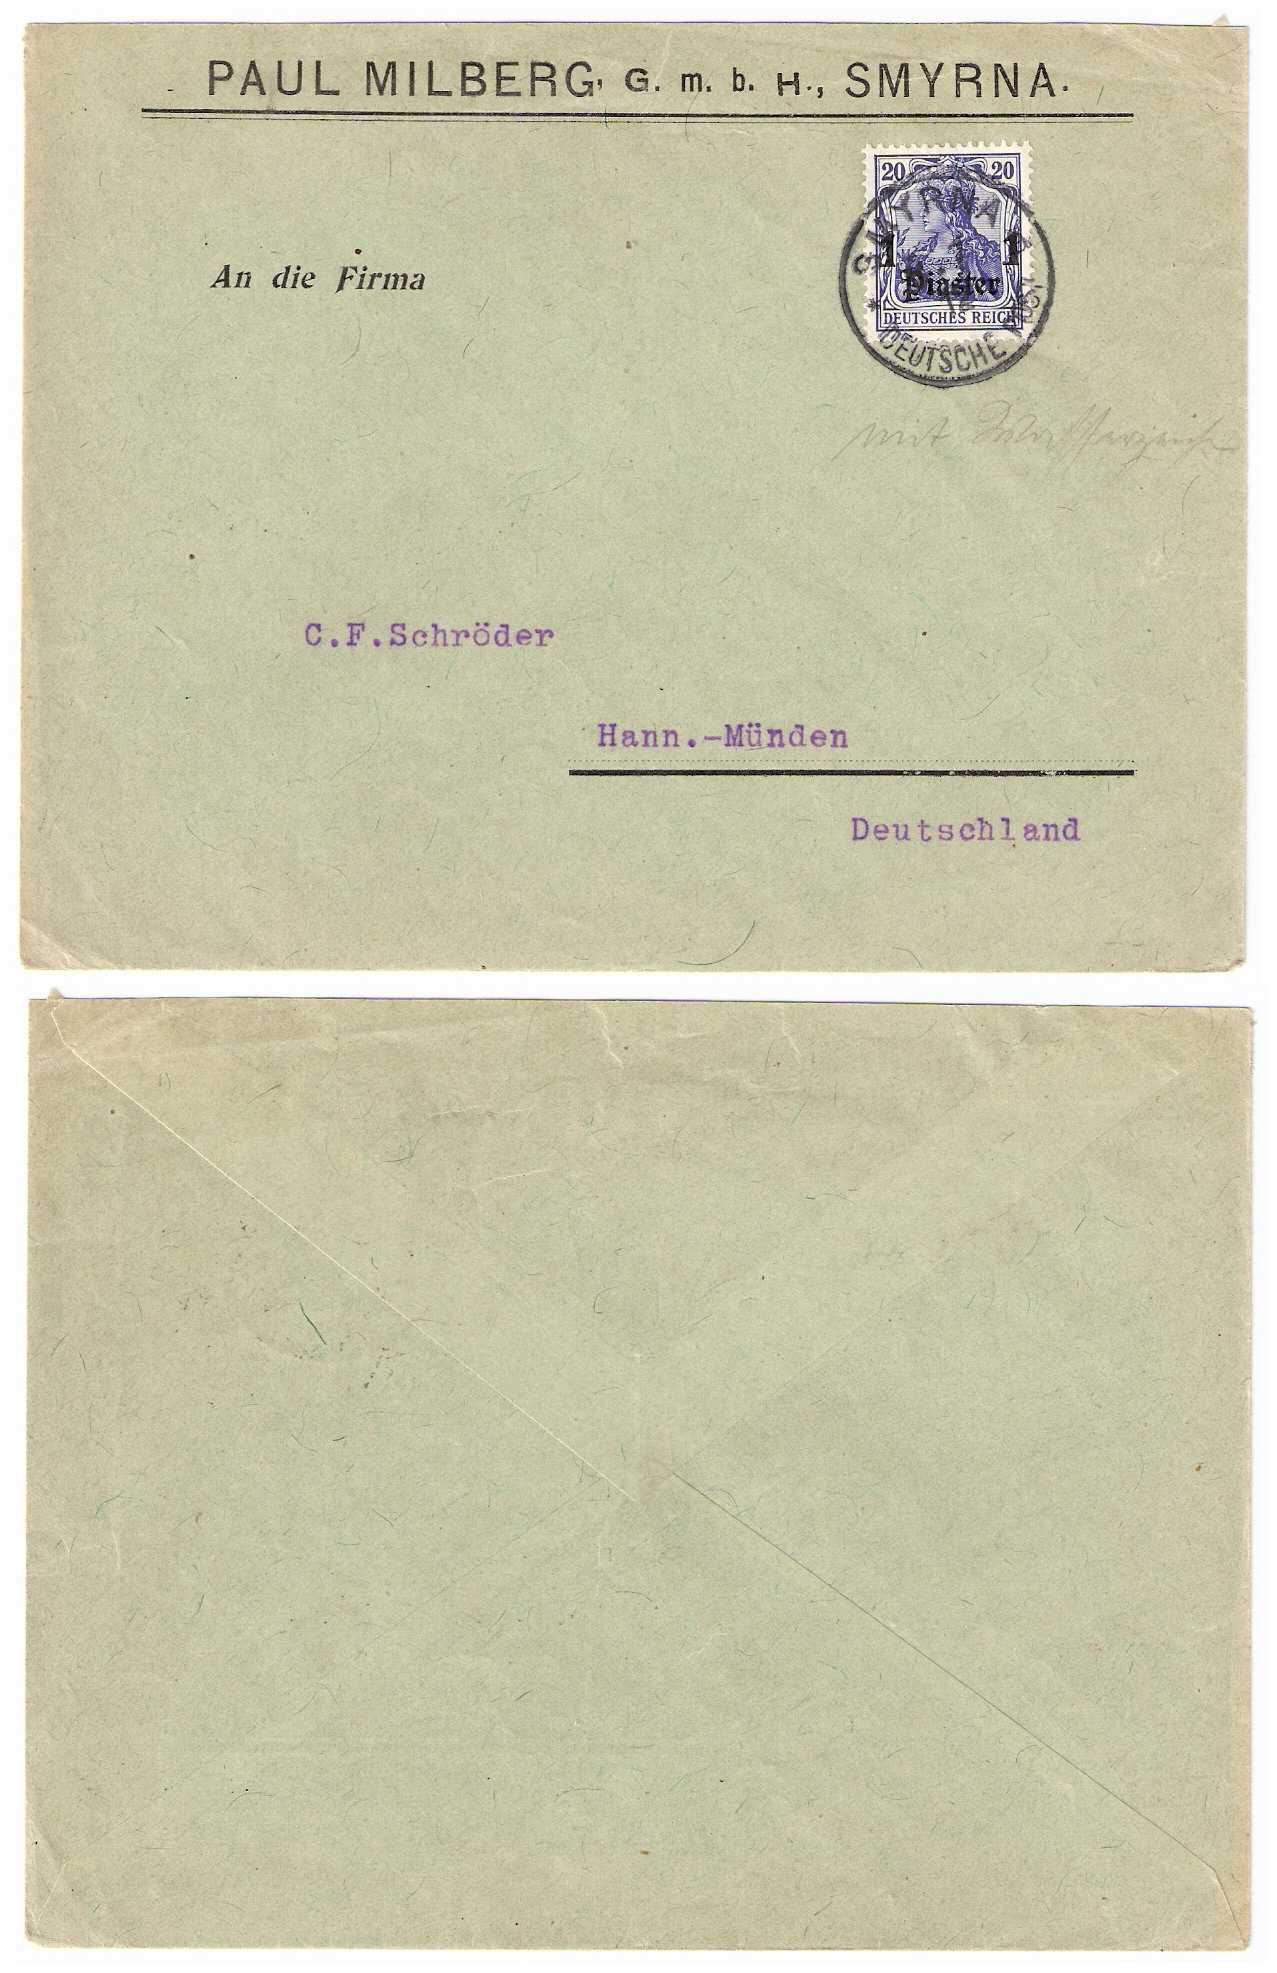 6.7.1912 German Post Offices in the Ottoman Empire Smyrna Letter